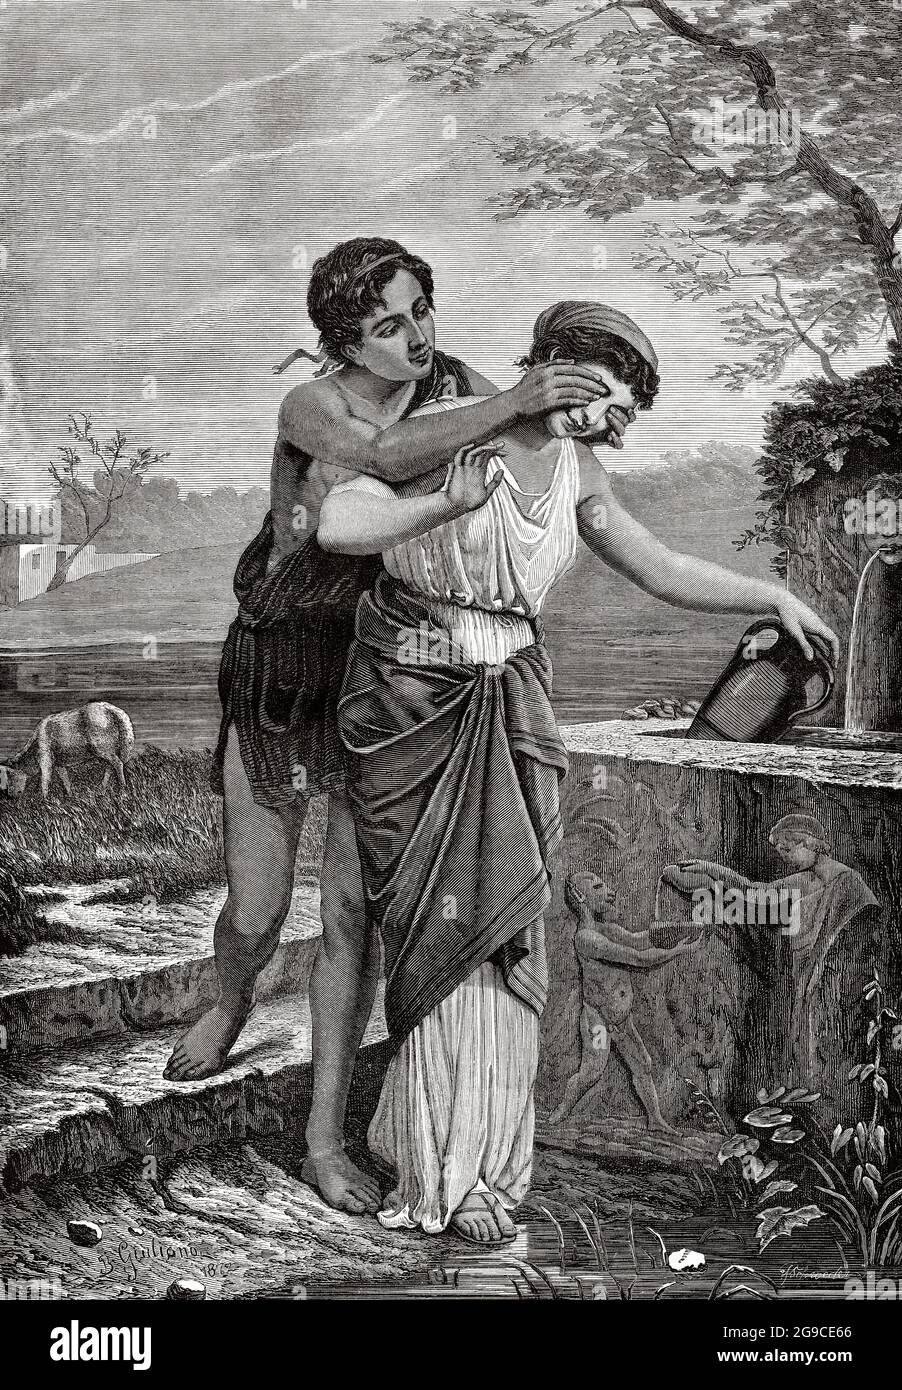 A young man in love with ancient greece surprises his beloved by covering her eyes to surprise her. Old 19th century engraved illustration from El Mundo Ilustrado 1879 Stock Photo